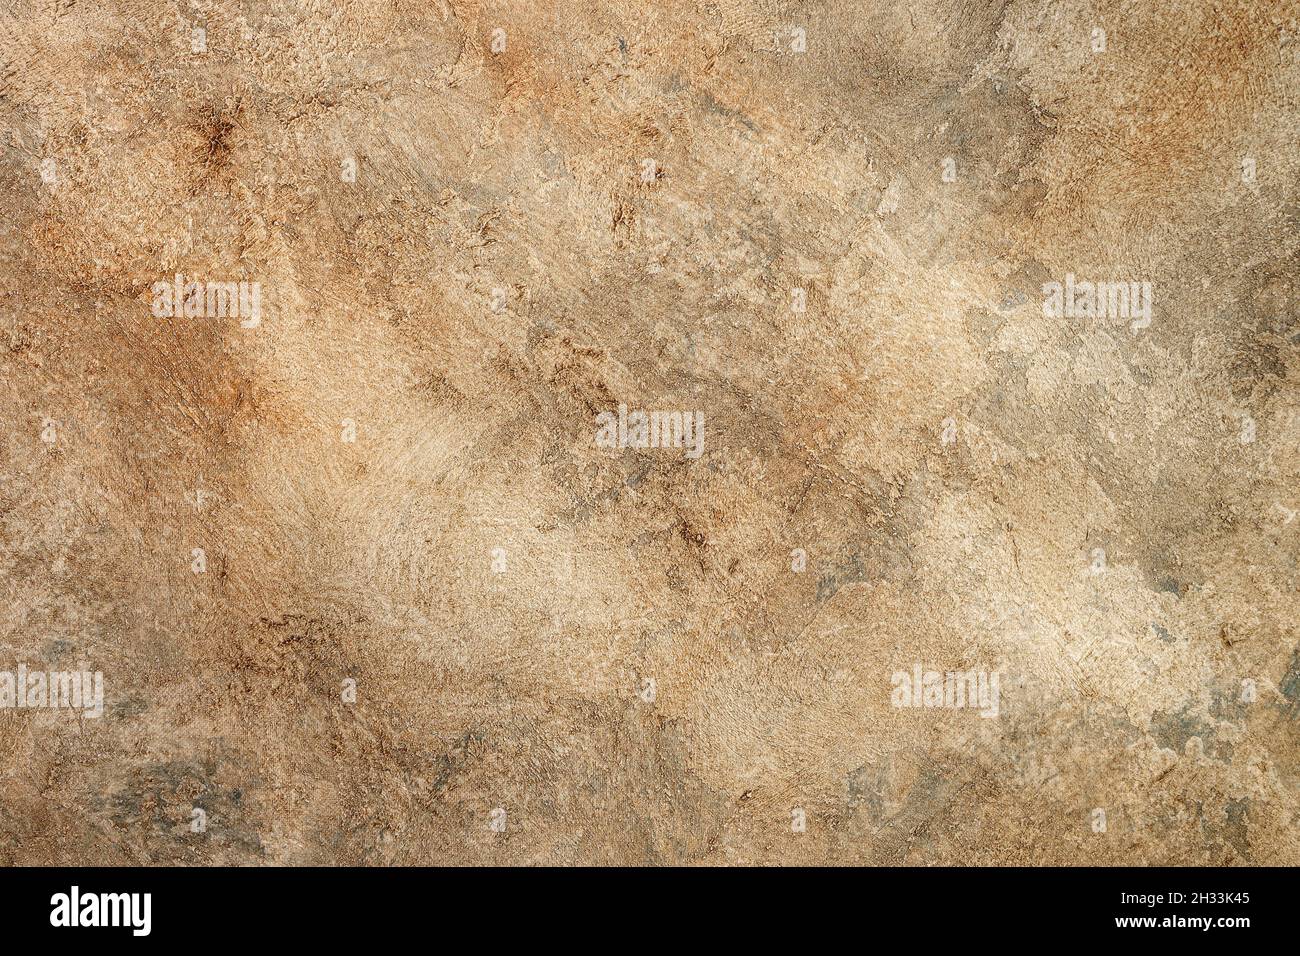 Abstract grunge background, textured concrete surface. Stock Photo